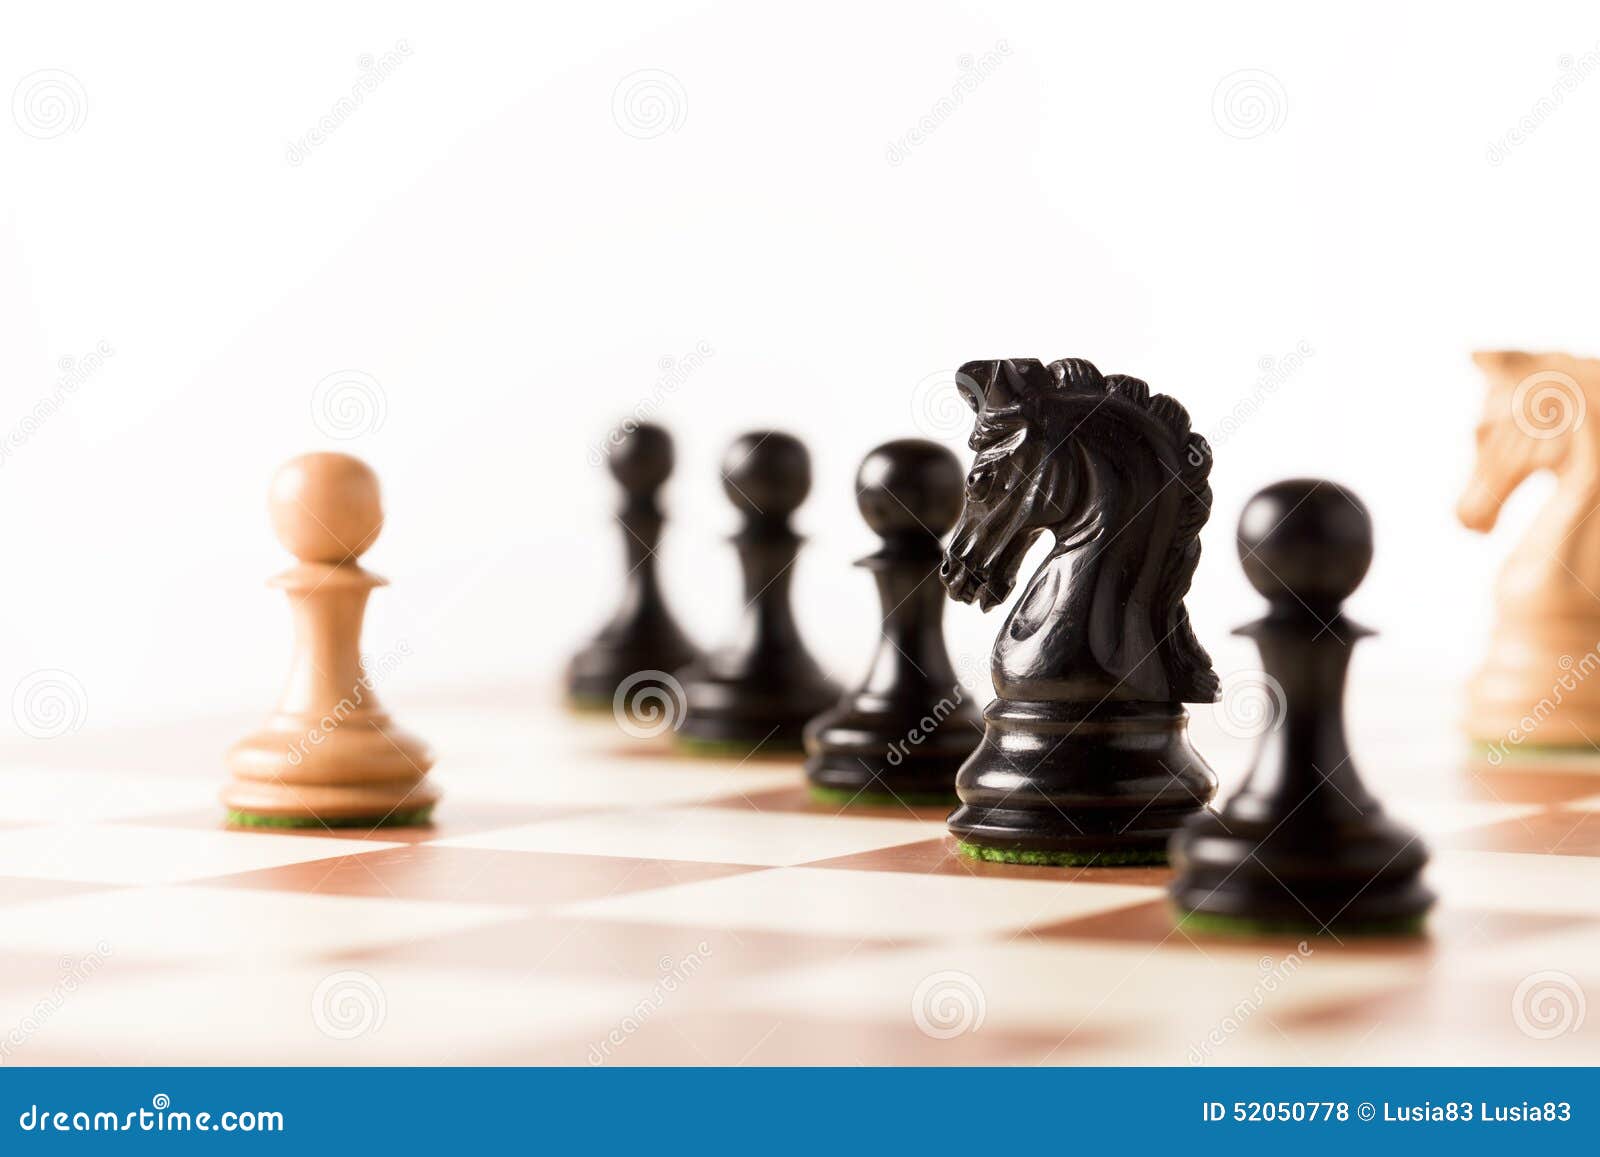 Chess Pieces on a Chess Board · Free Stock Photo